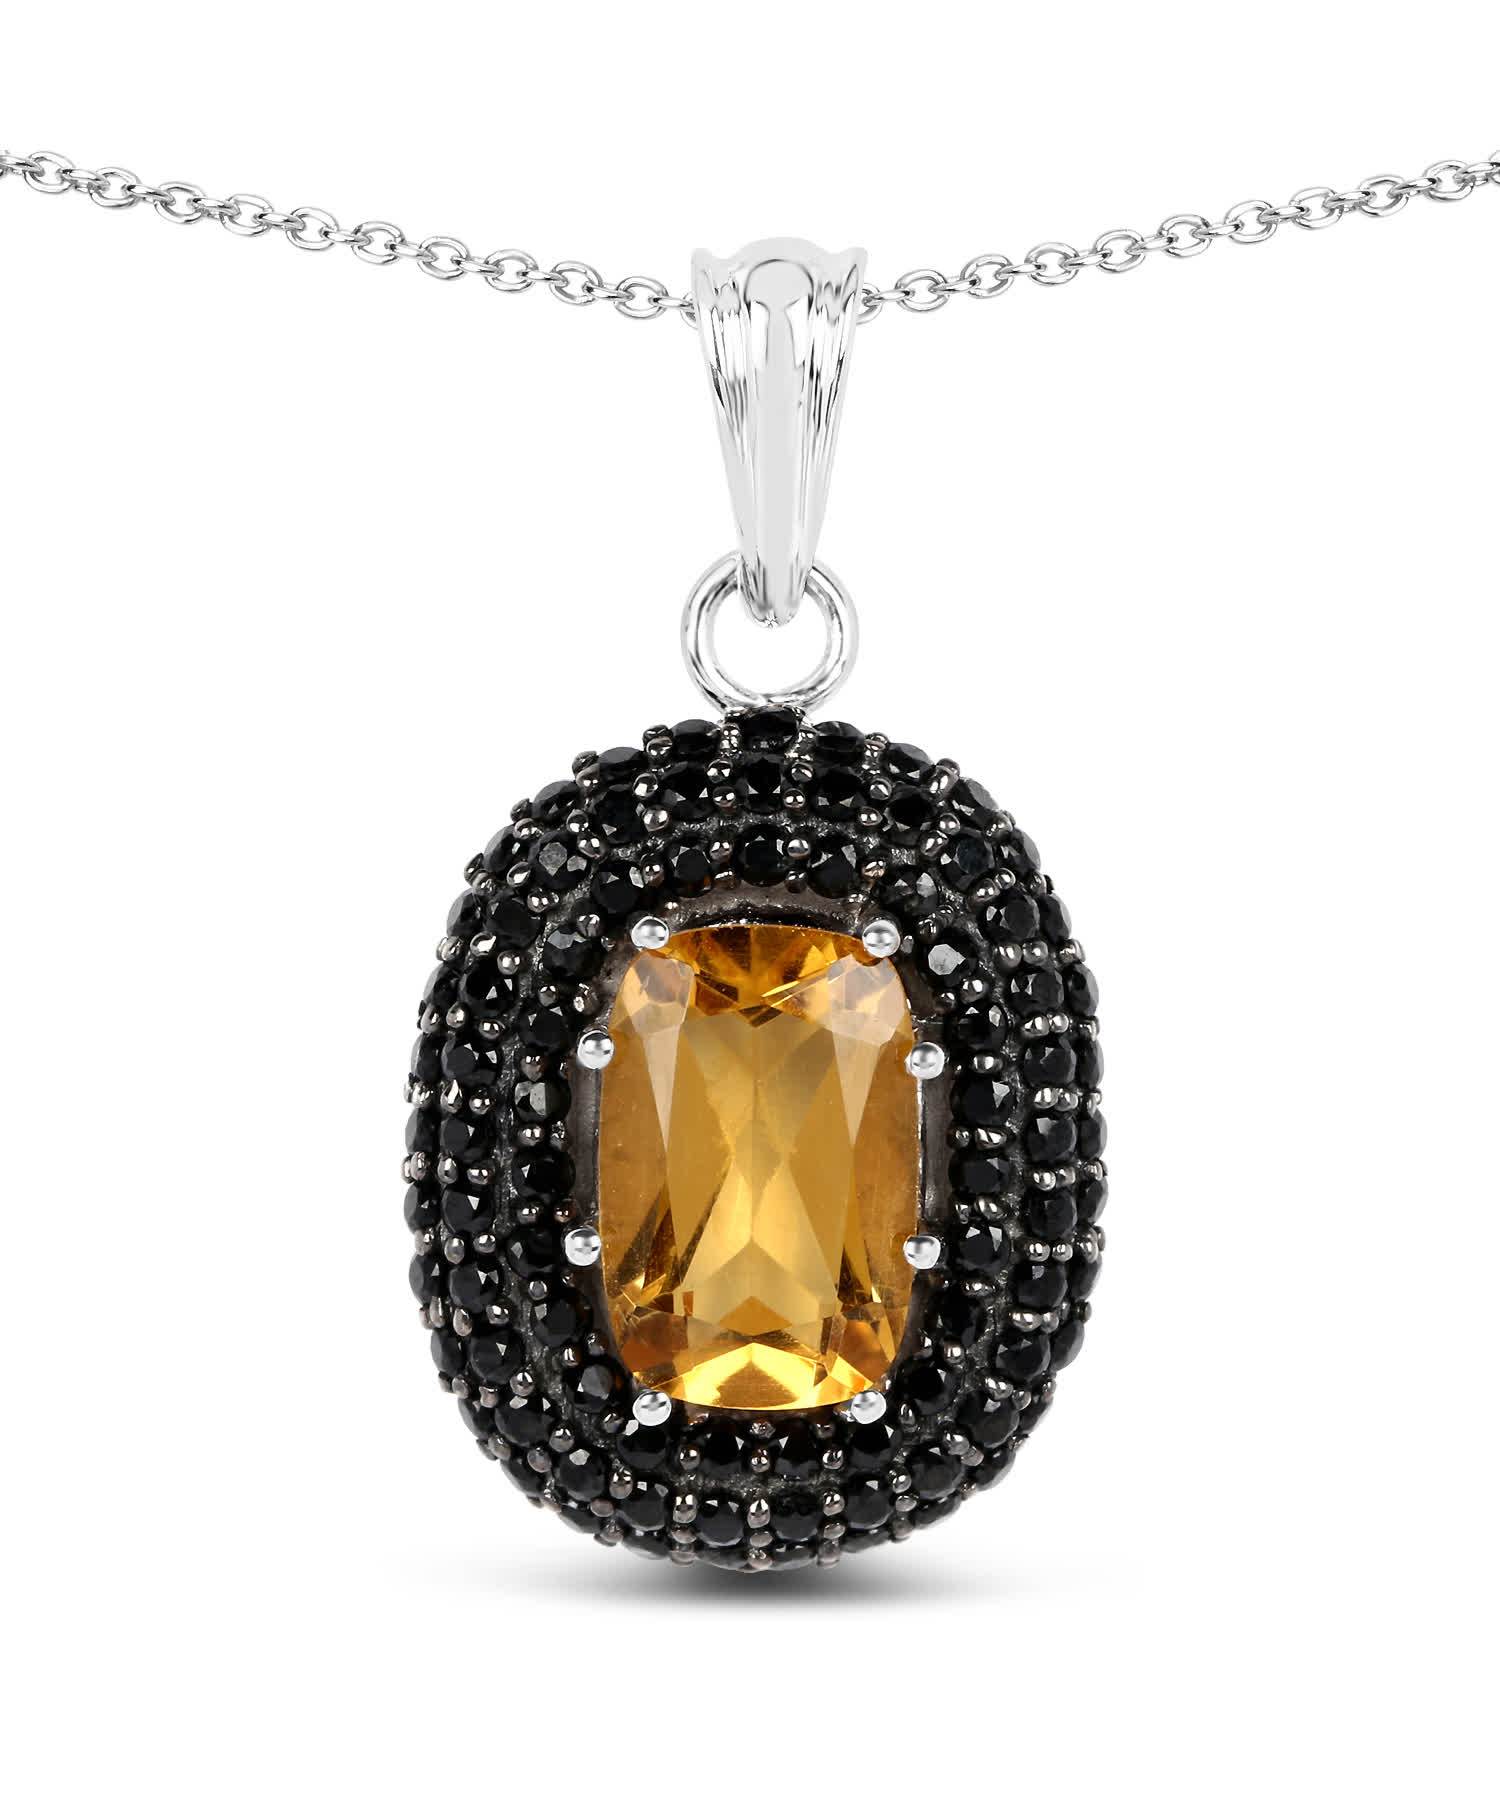 5.85ctw Natural Honey Citrine and Black Spinel Rhodium Plated 925 Sterling Silver Pendant With Chain View 1